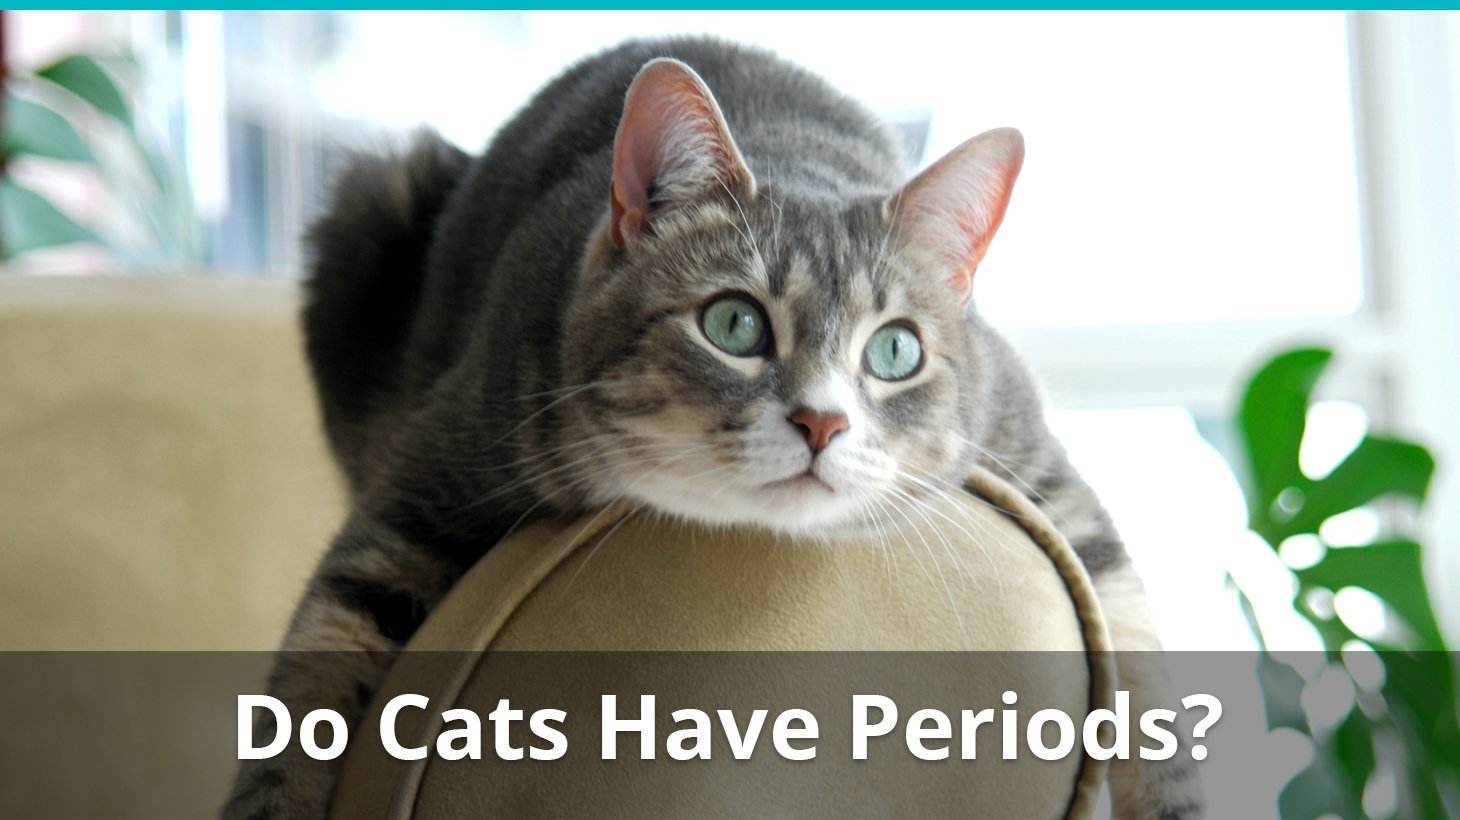 Do Female Cats Have Periods & Bleed During A Menstrual Cycle?